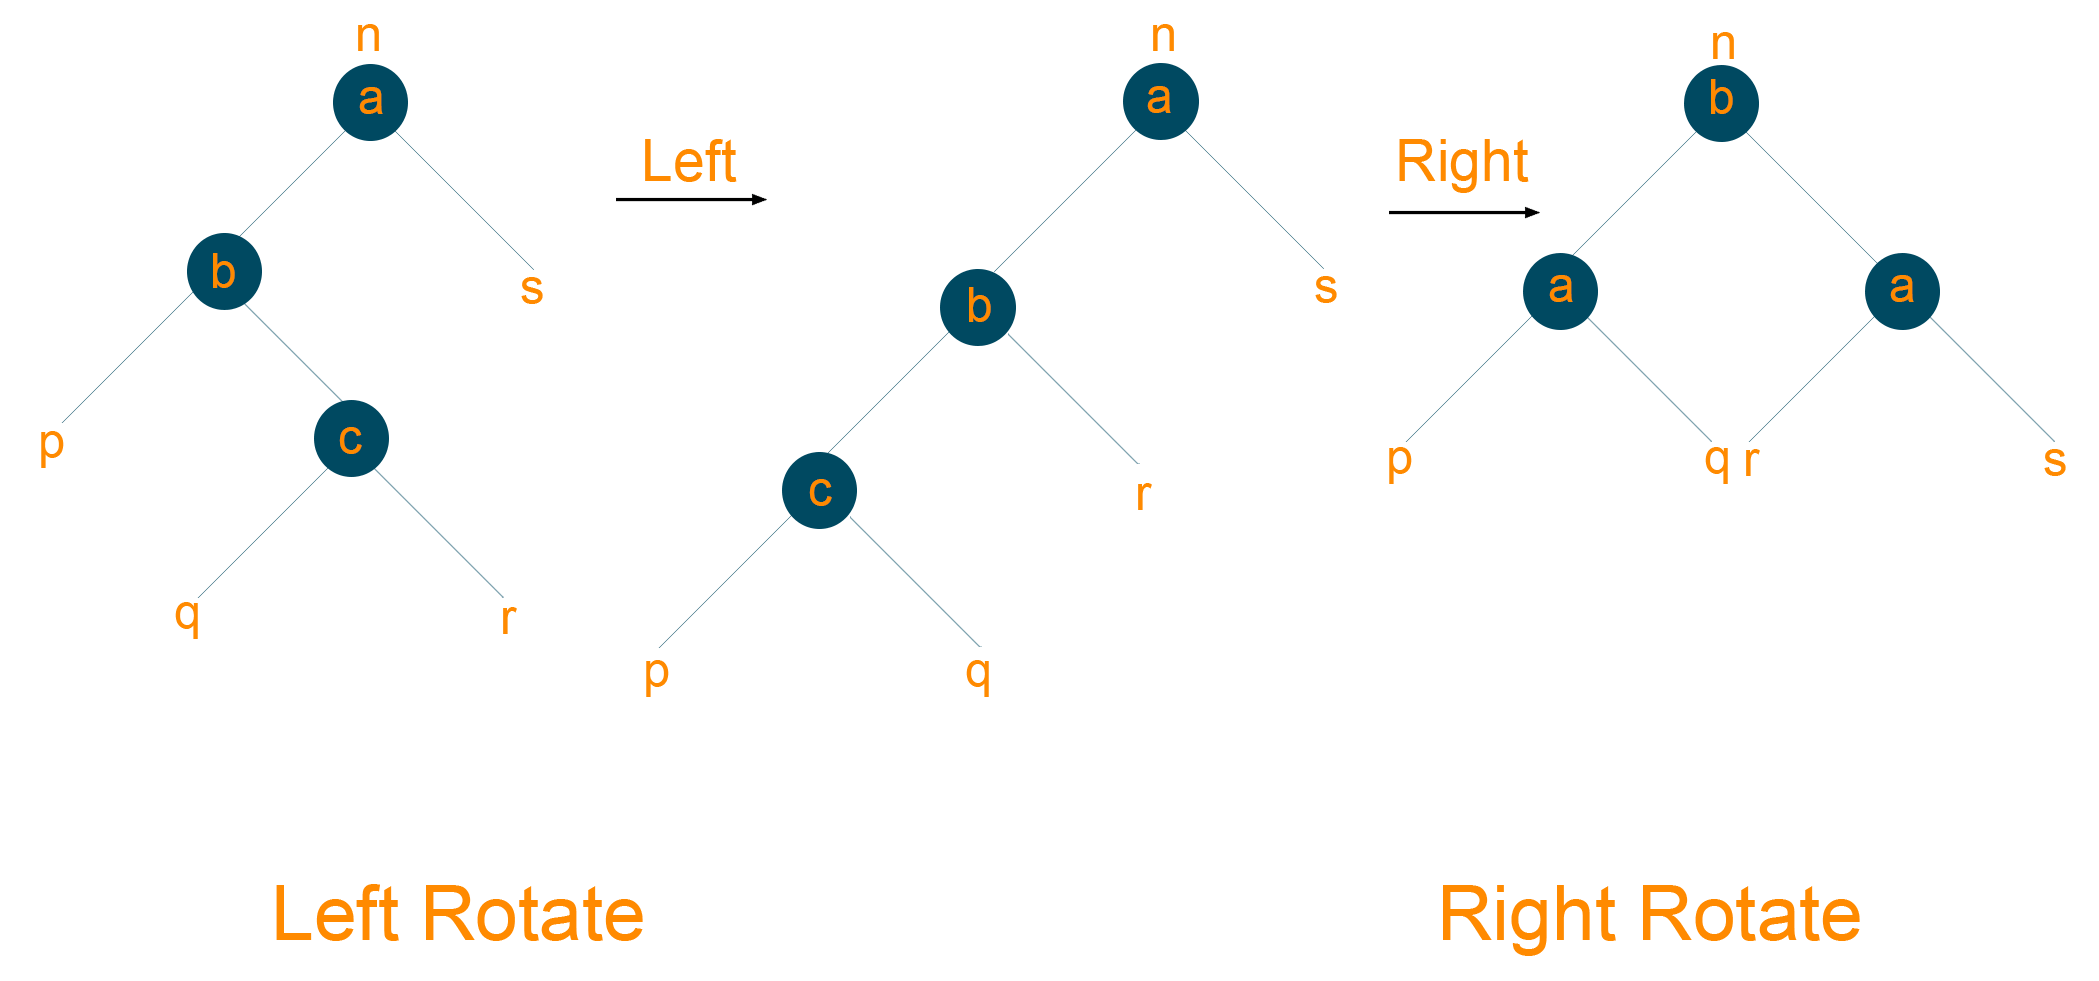 Left right rotation example of red black tree